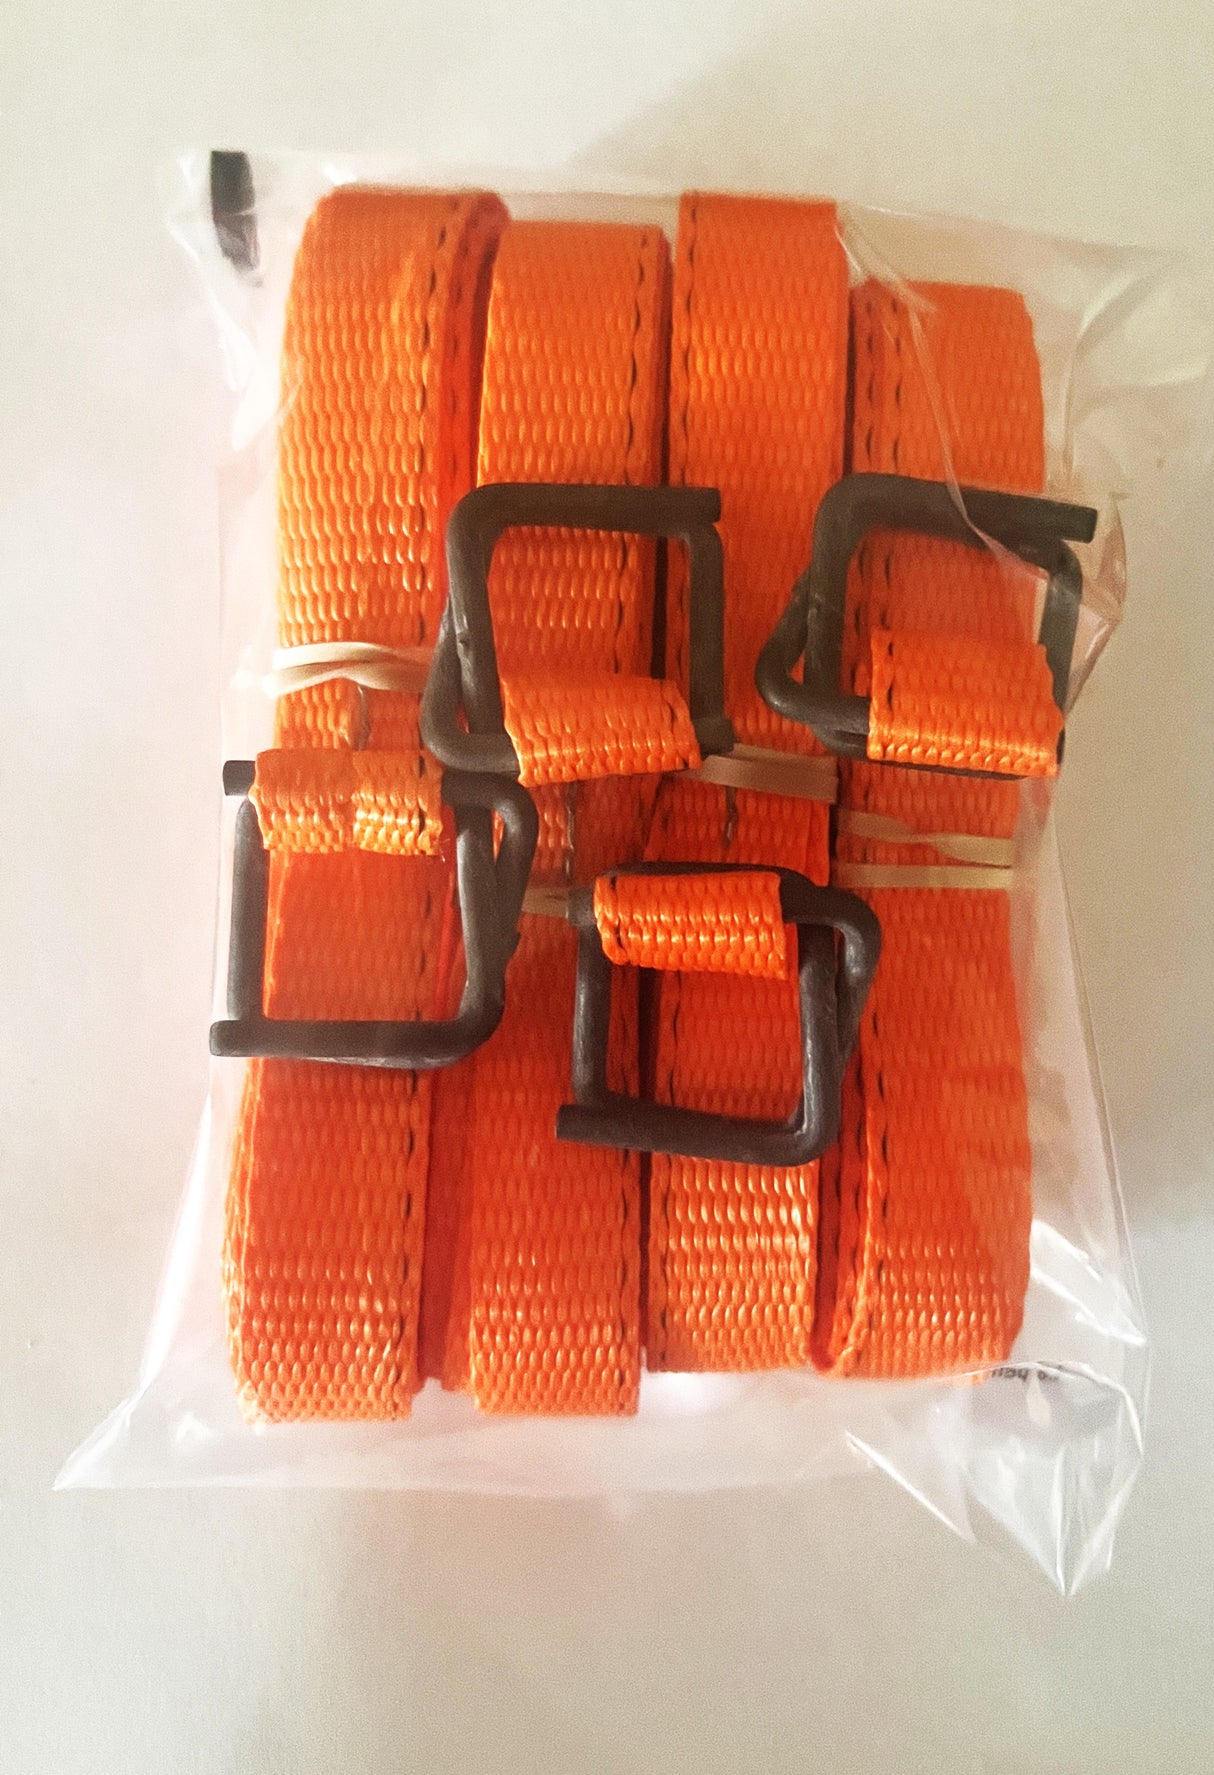 Strap-N-Go Field Pallet Strapping Kit - 13 ft (4 pcs)